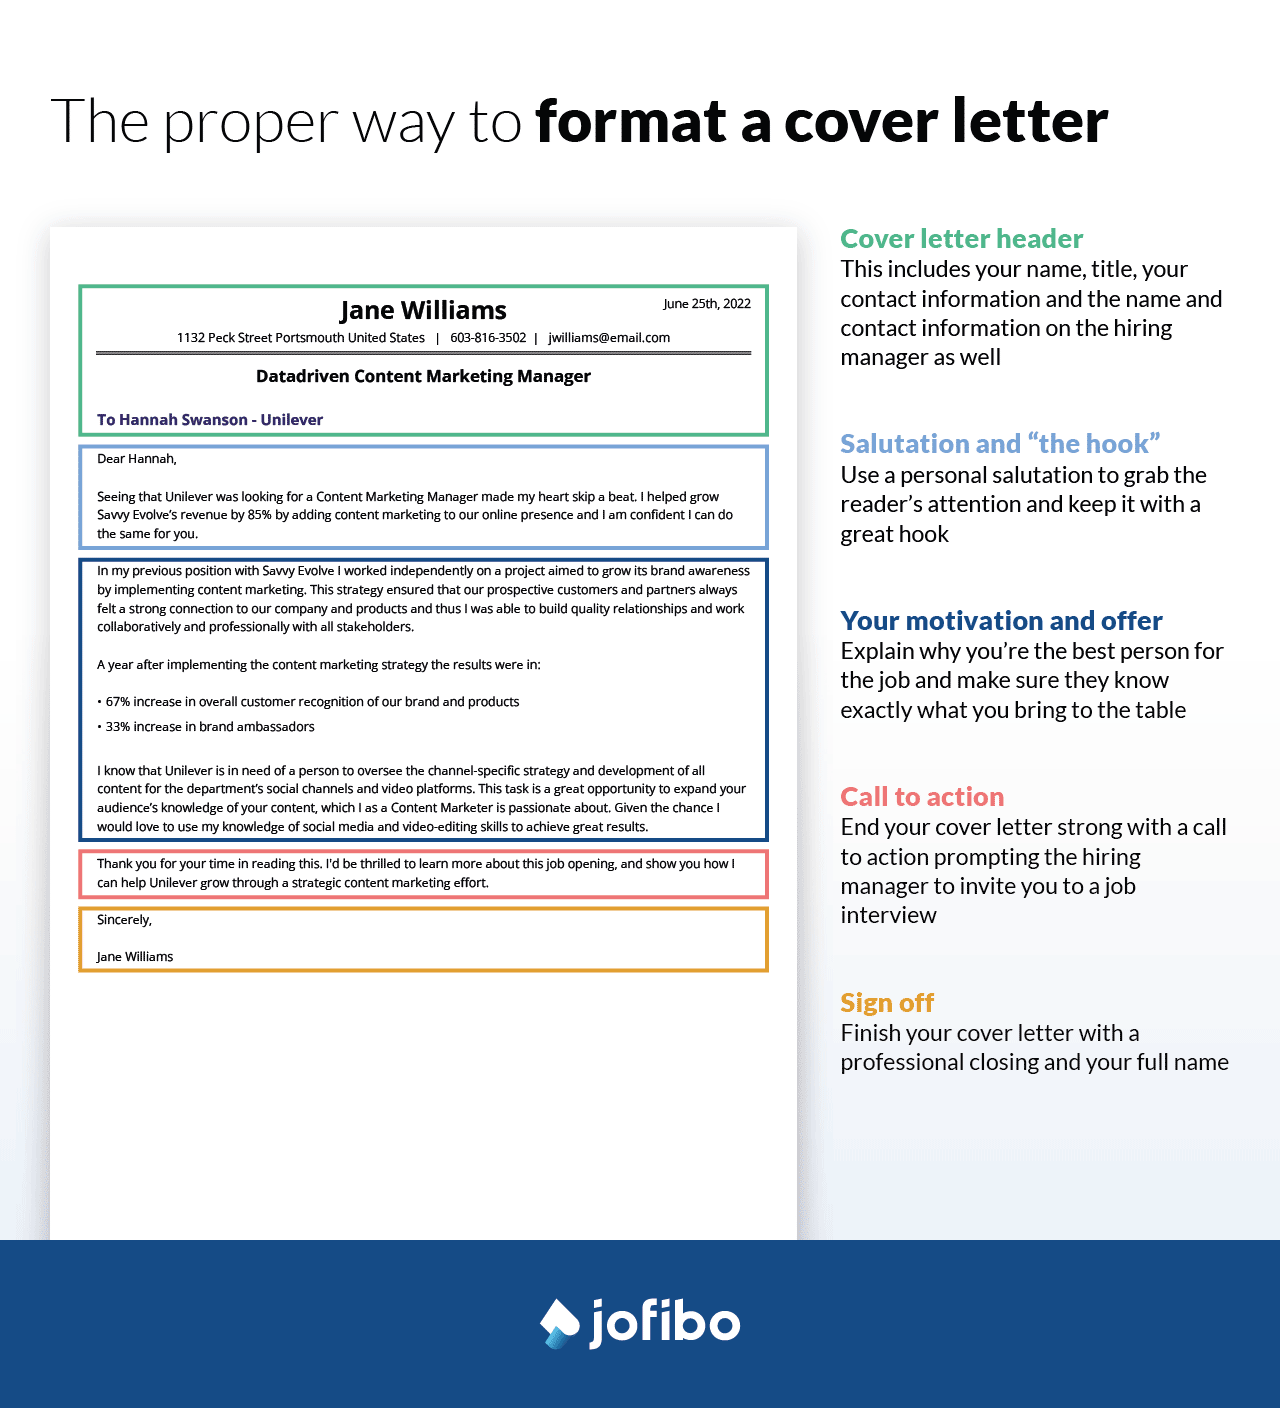 How to format a cover letter the proper way with indication of different elements of a cover letter